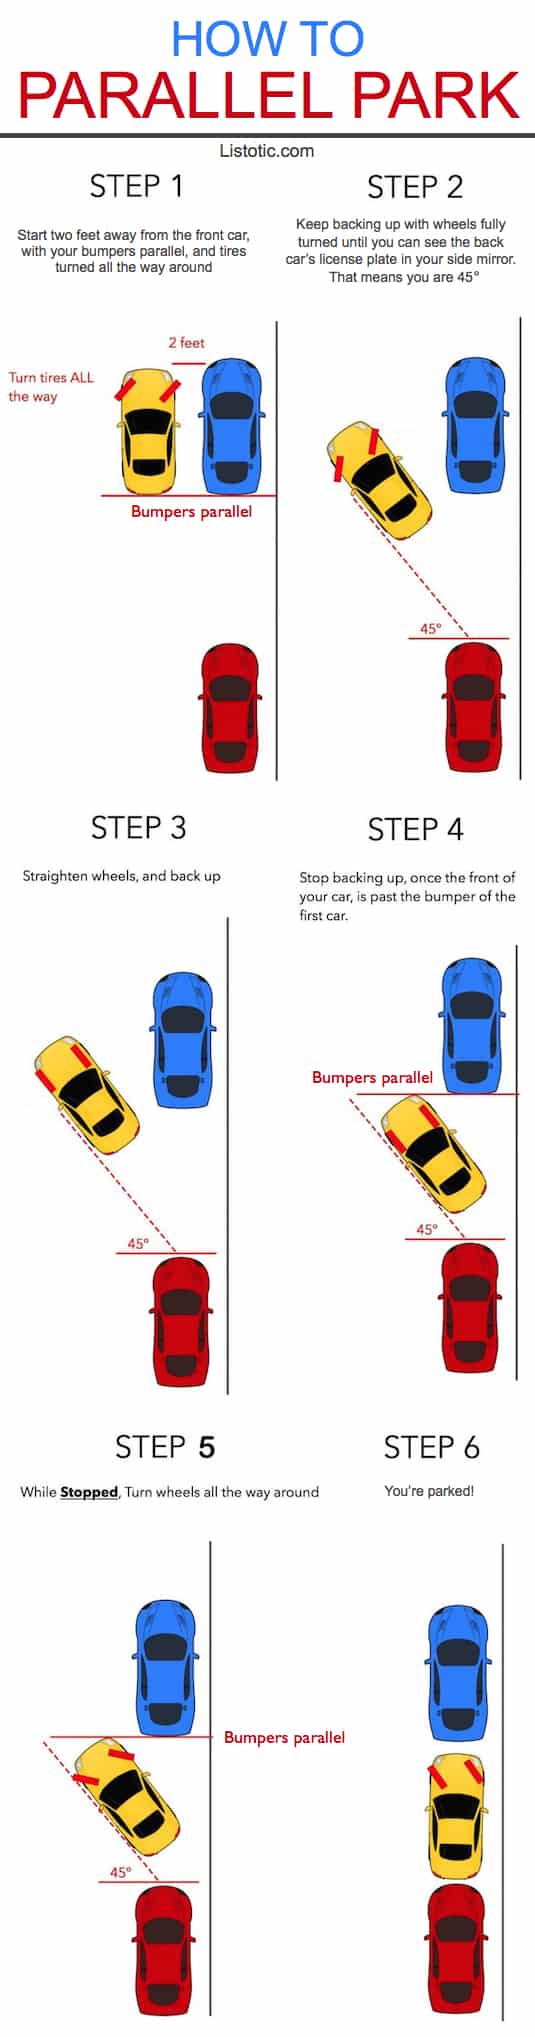 Parallel parking step-by-step guide. This helps a ton!! -- 10 Helpful Tips That Will Make You A Better Driver